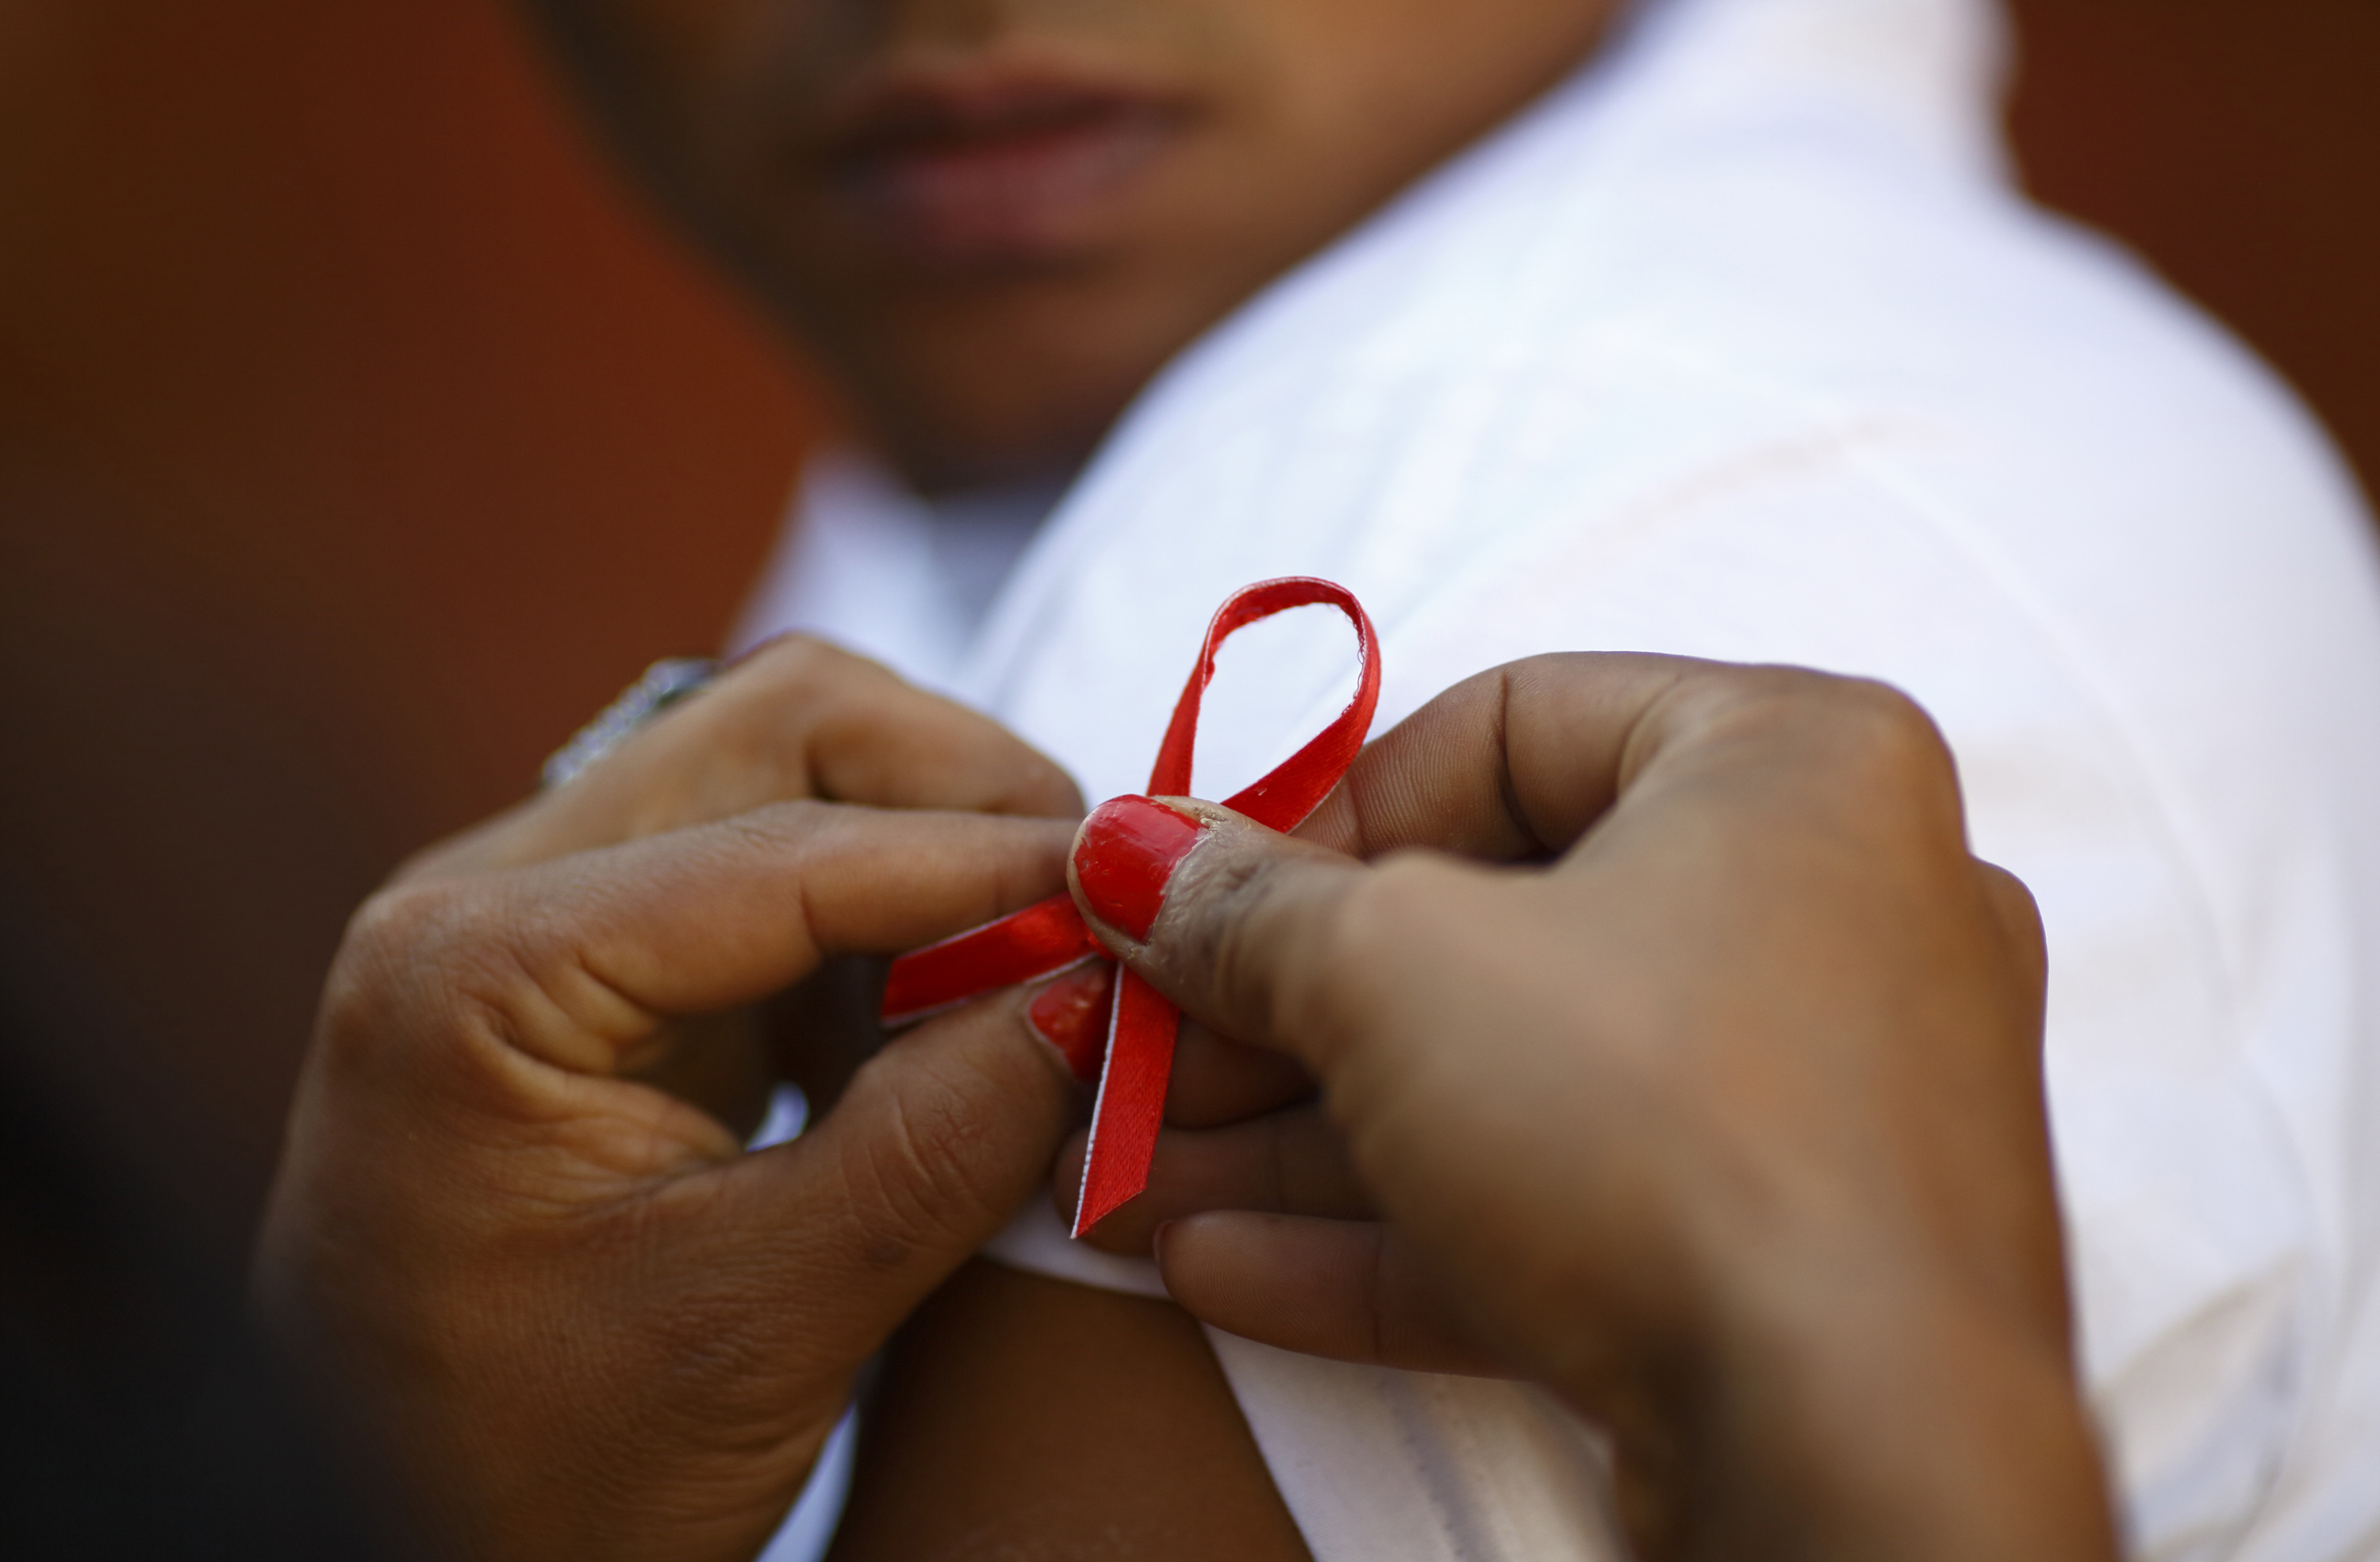 A red ribbon is put on the sleeves of a man by his friend to show support for people living with HIV during a program to raise awareness about AIDS on World AIDS Day in Kathmandu